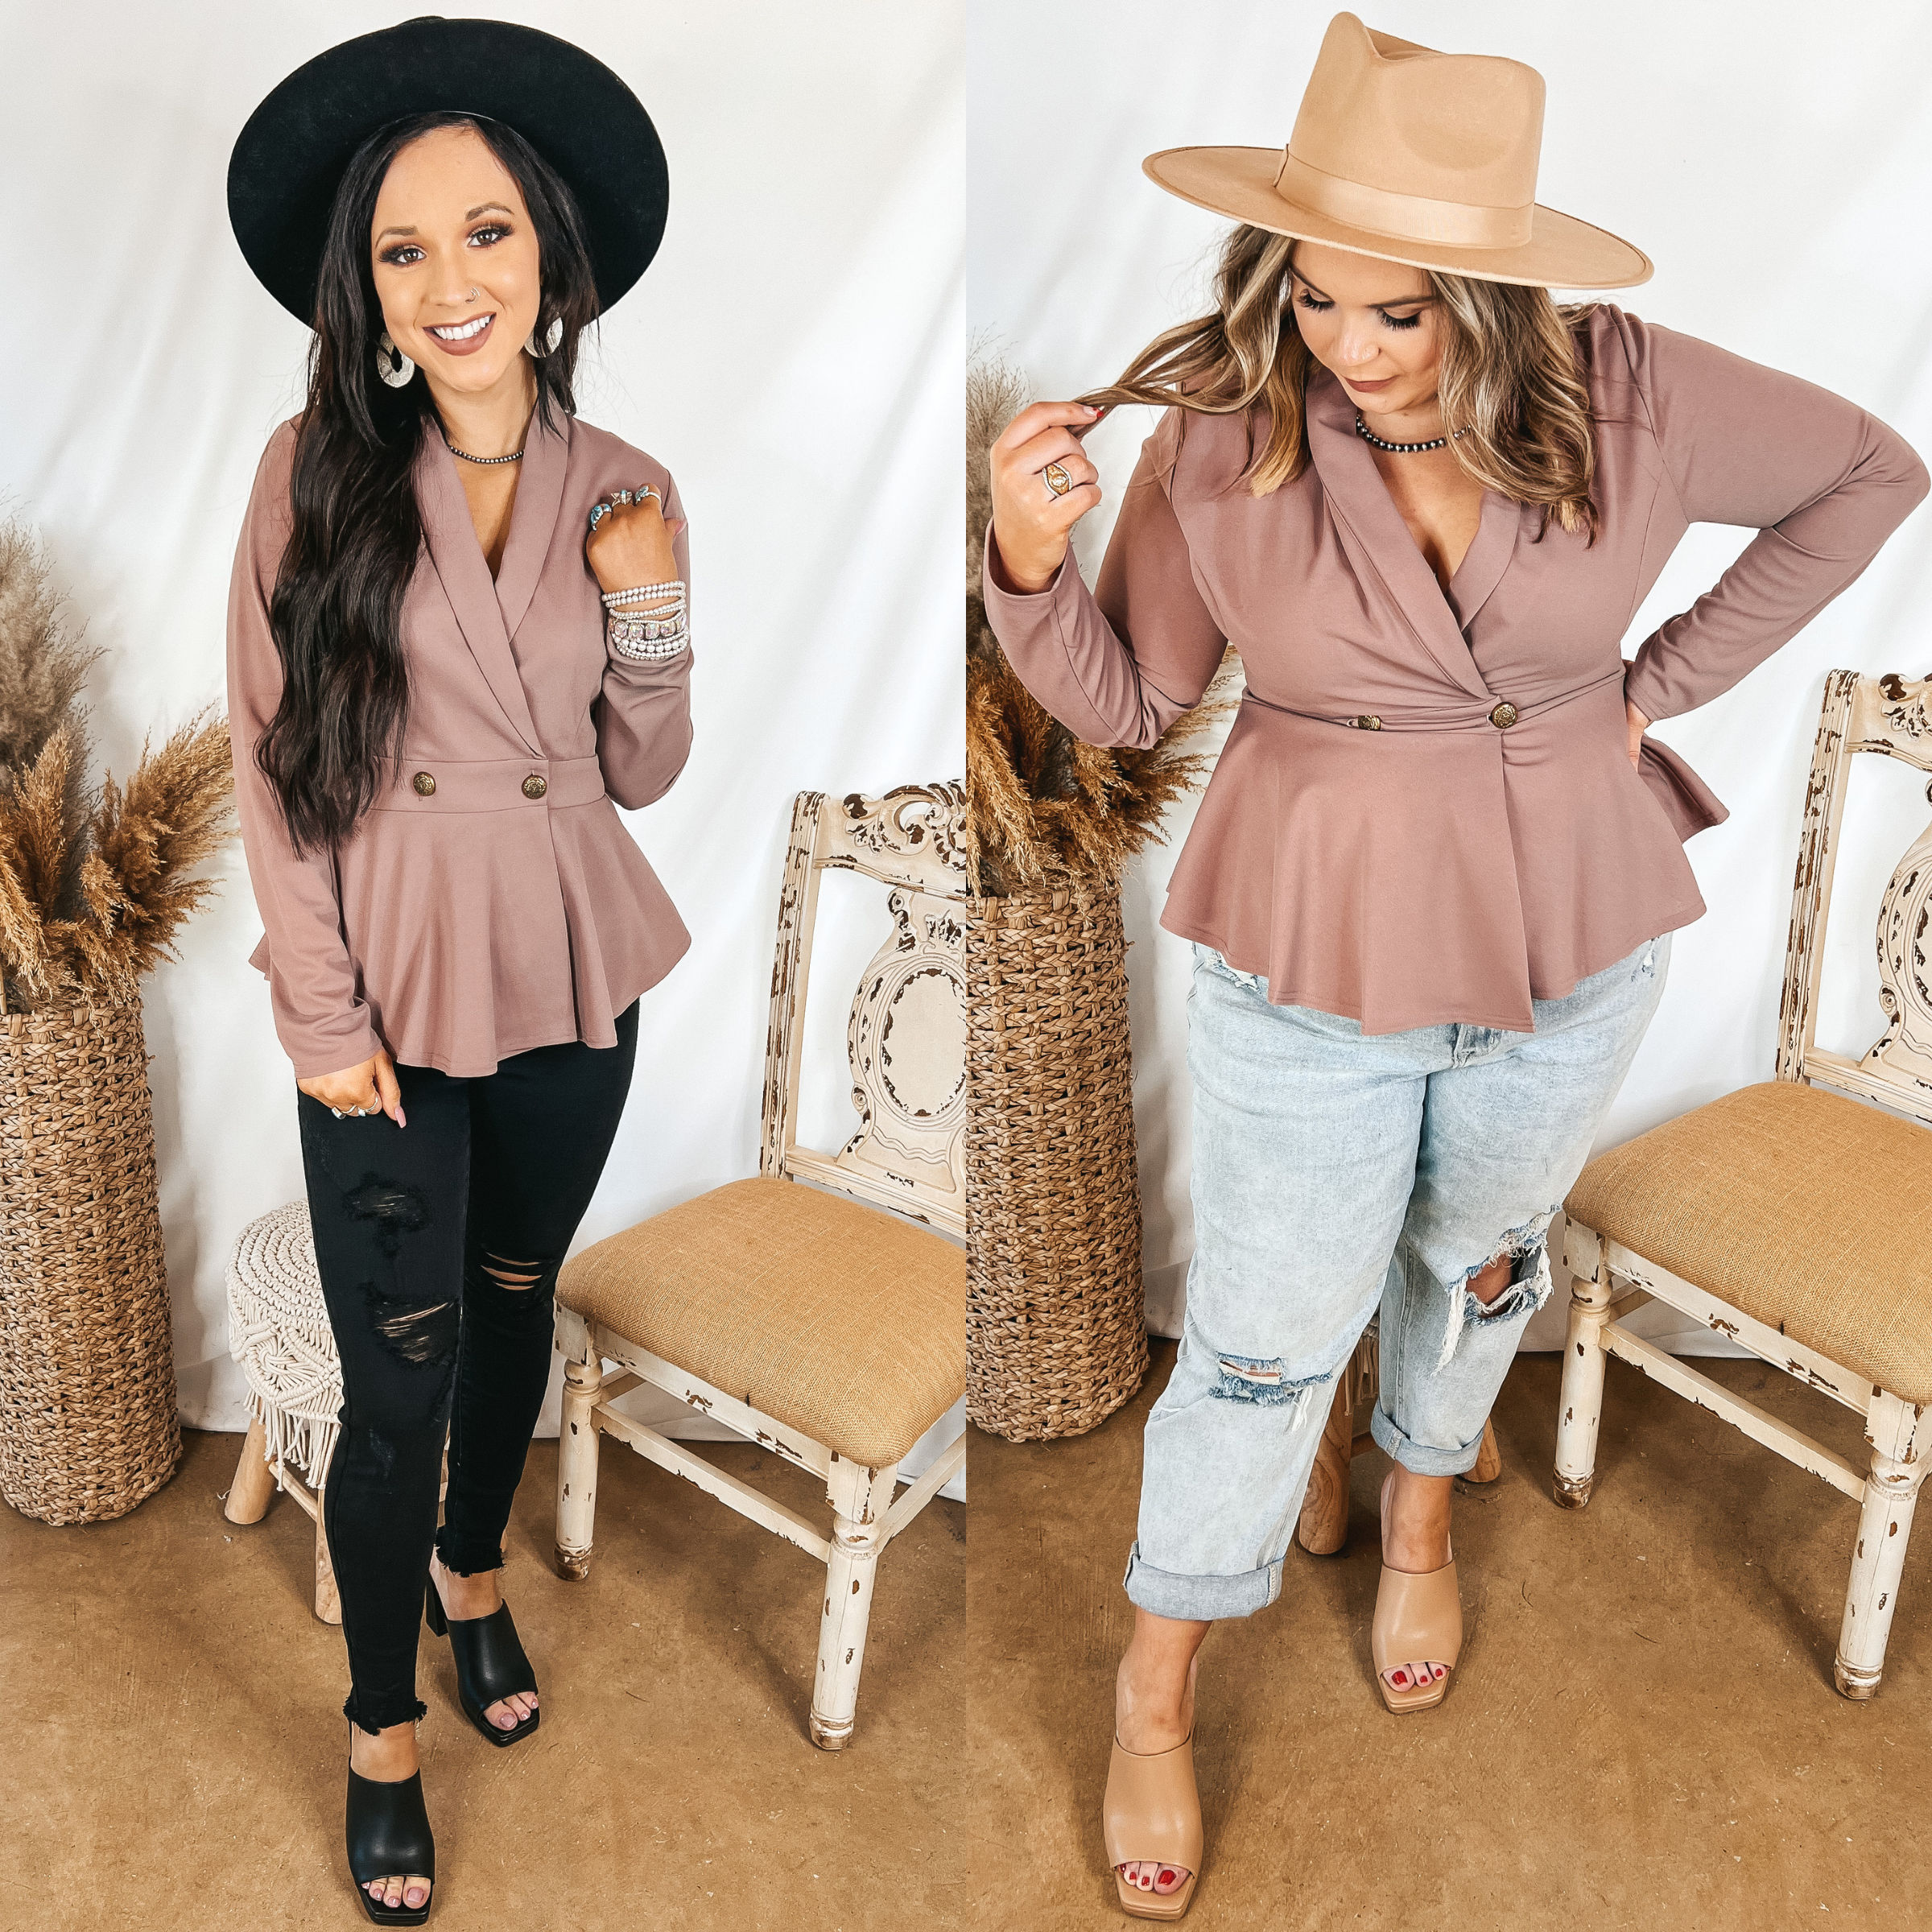 Models are wearing a mauve peplum blazer that is buttoned in the front. Size small model has it paired with black skinny jeans, black heels, and a black hat. Size large model has it paired with light wash jeans, tan heels, and a tan hat.